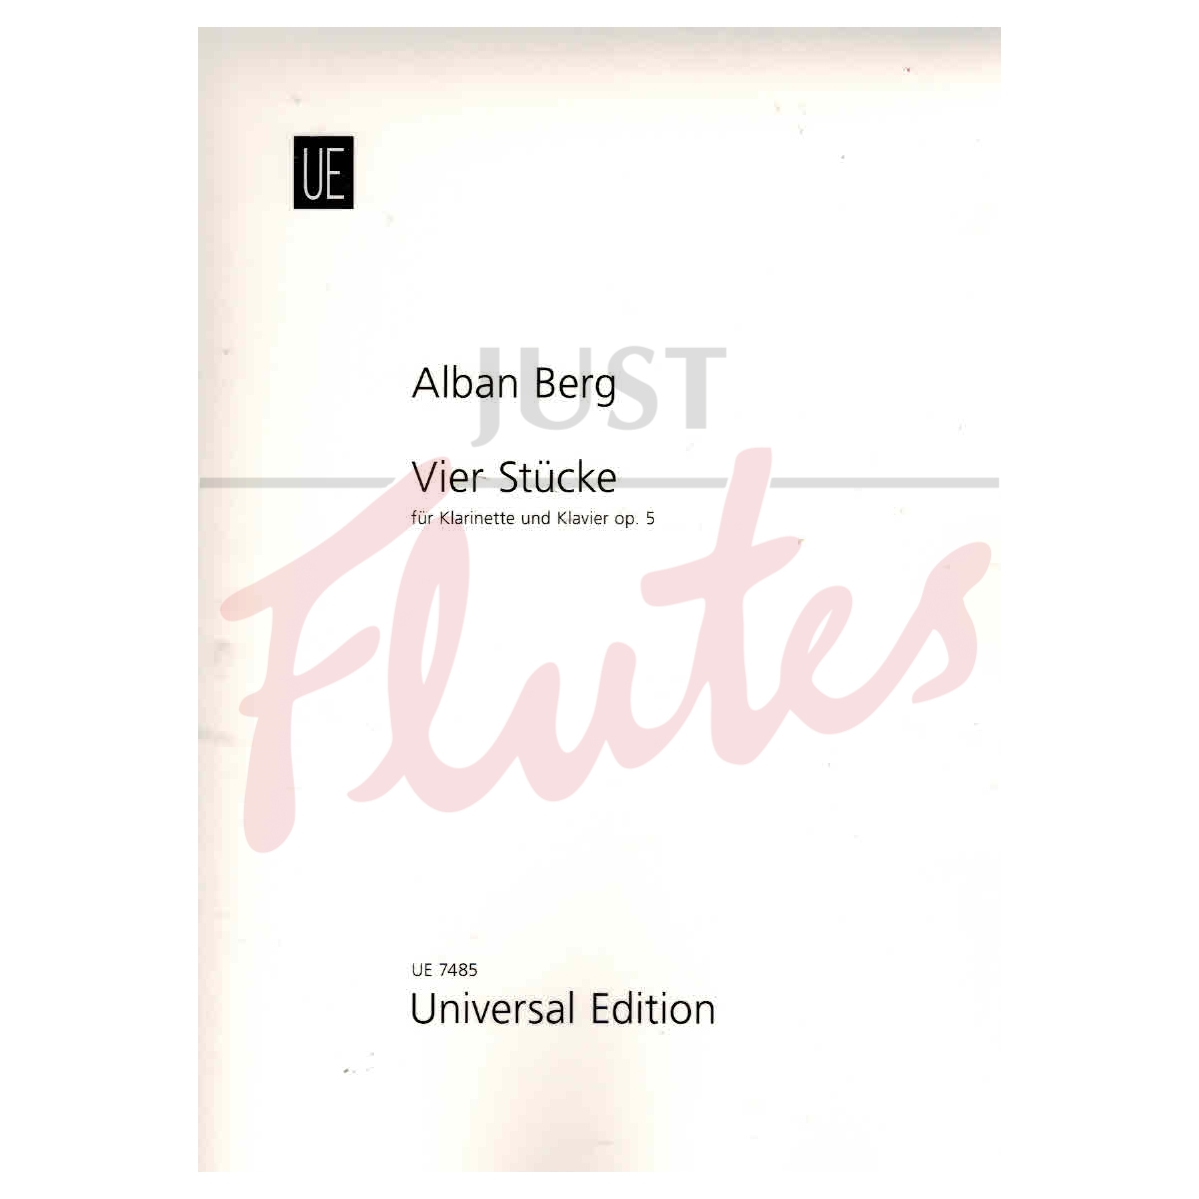 Four Pieces for Clarinet and Piano